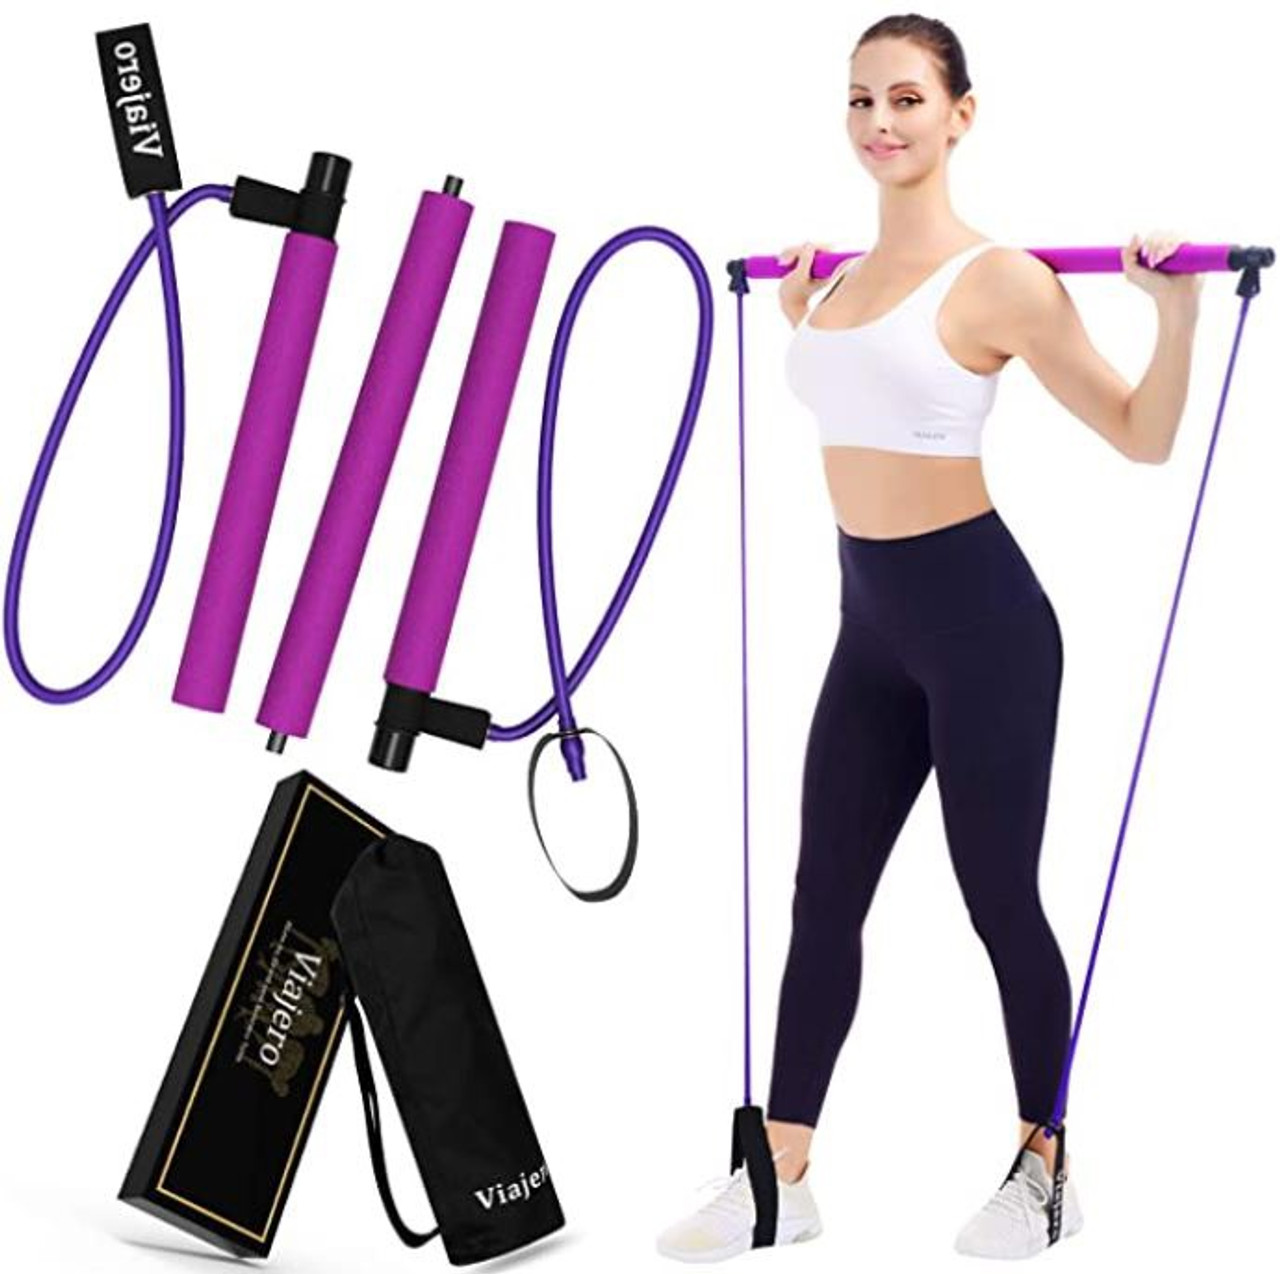 Pilates Bar Kit with Ab Roller, Adjustable 3-Section Pilates Bar with 4  Resistance Bands for Women/Men, Portable Yoga Pilates Bar for Home Gym Full